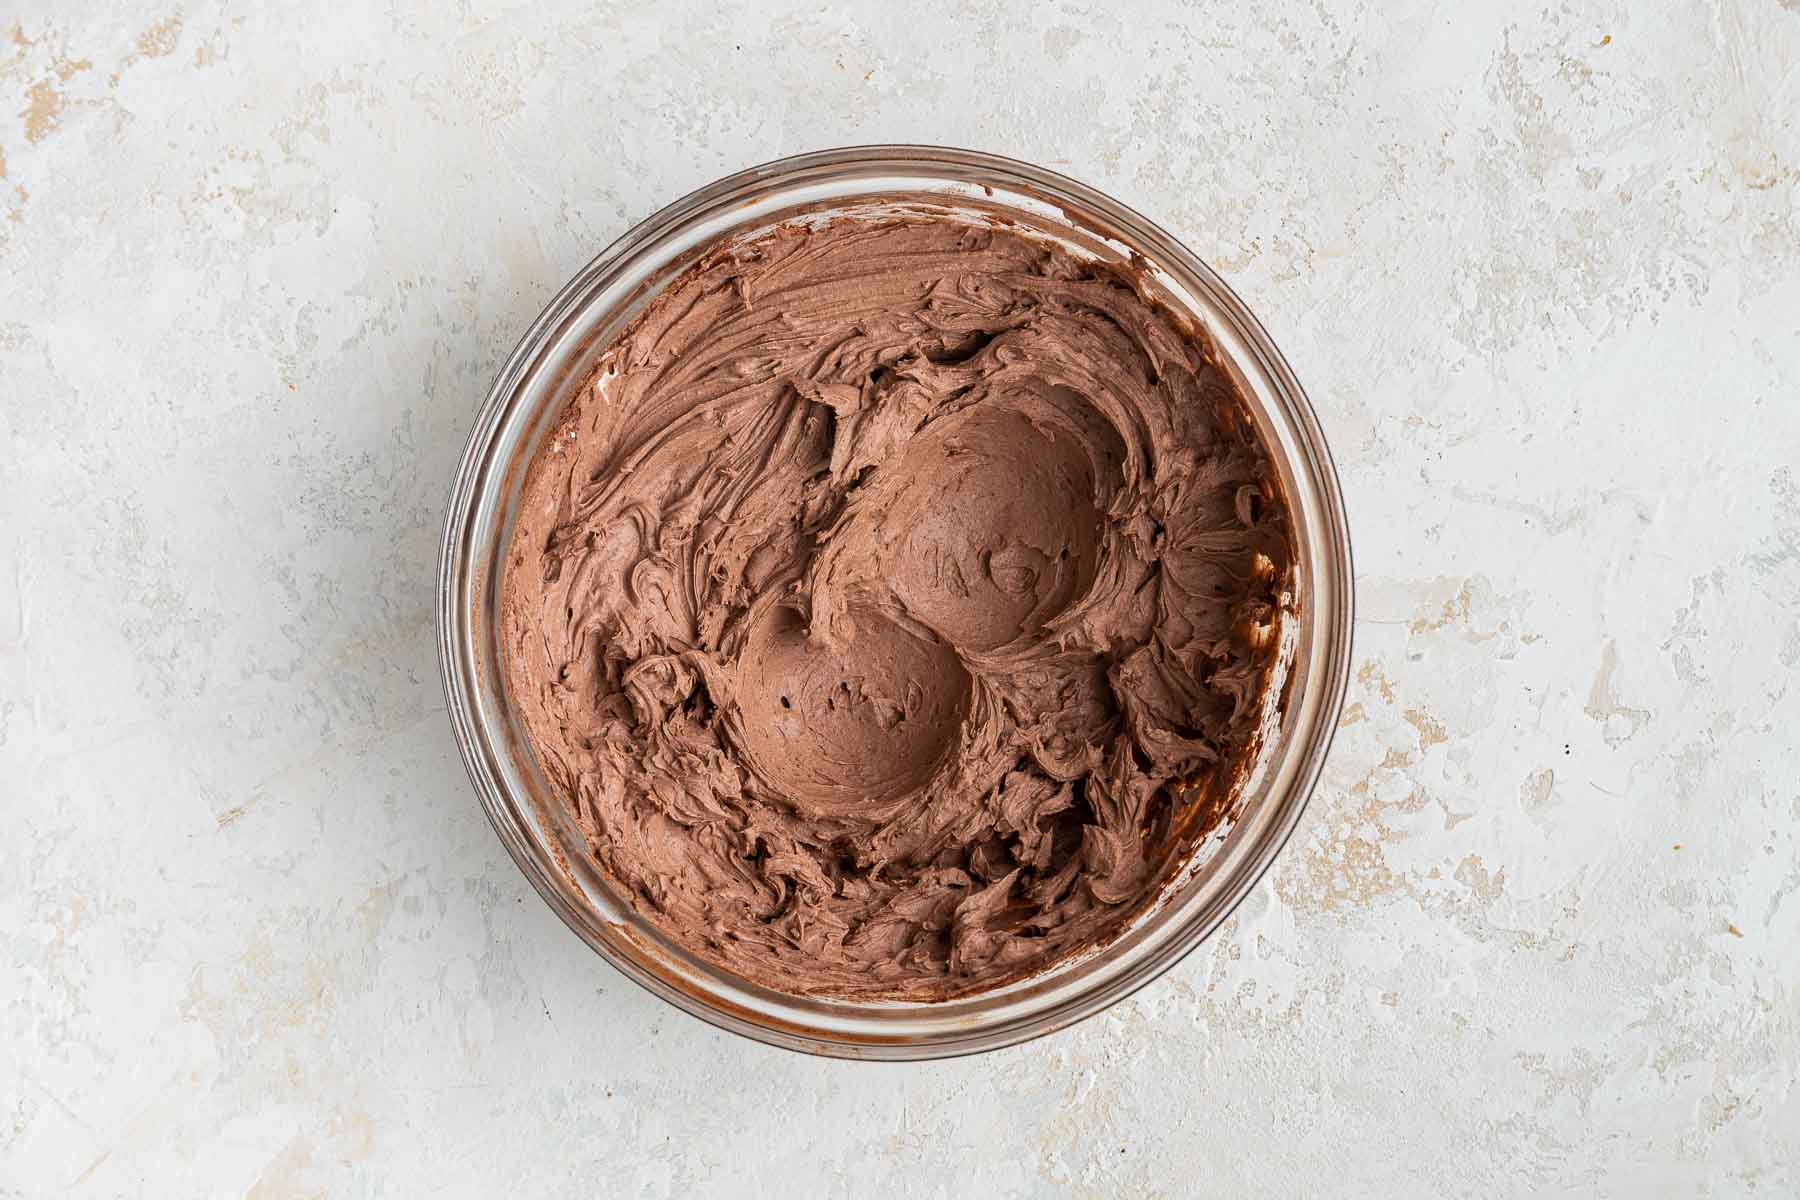 Freshly made chocolate whipped cream in round bowl.